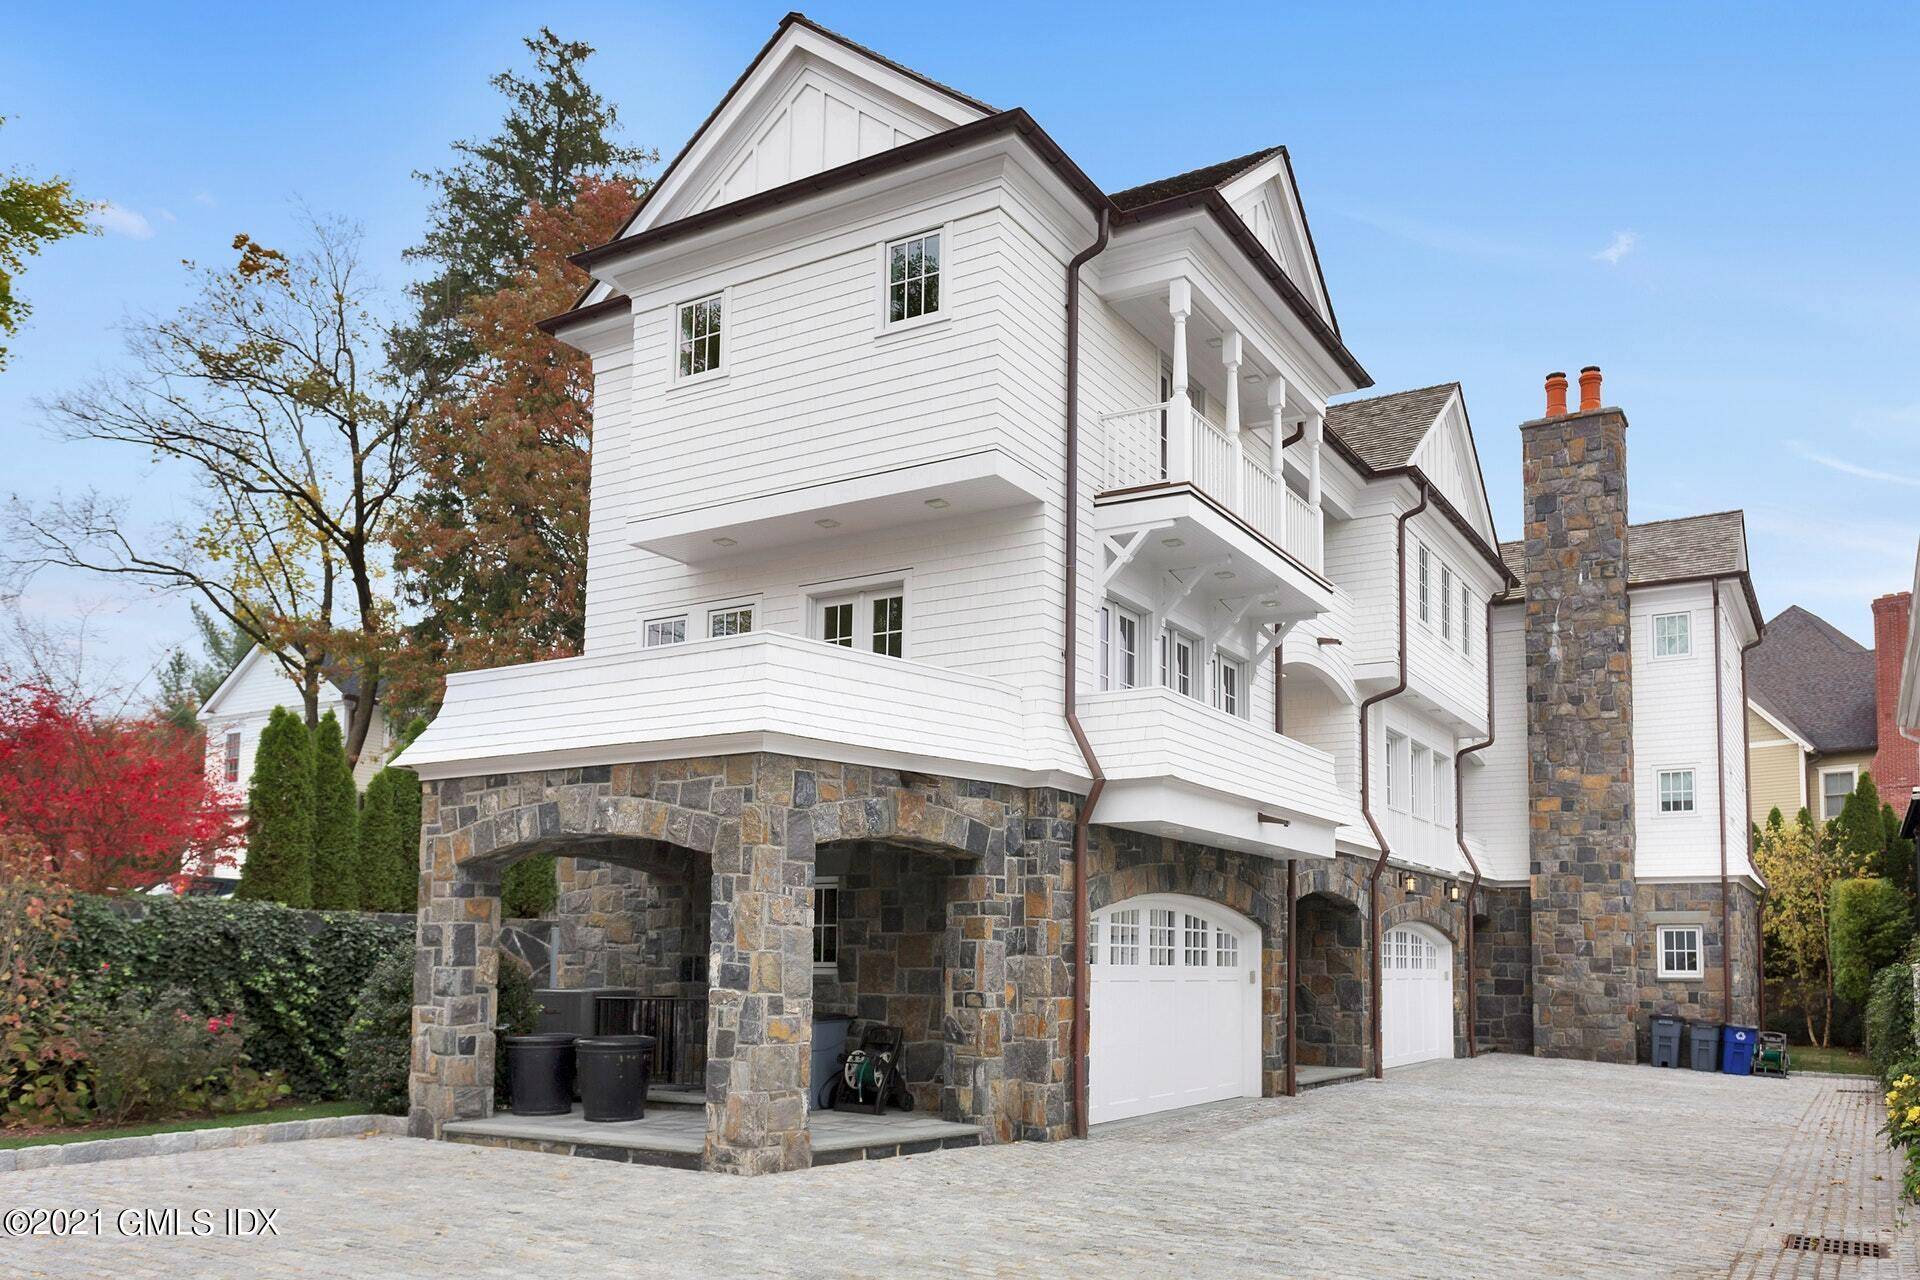 This New Construction Townhouse in downtown Greenwich is elegant, charming and sophisticated.